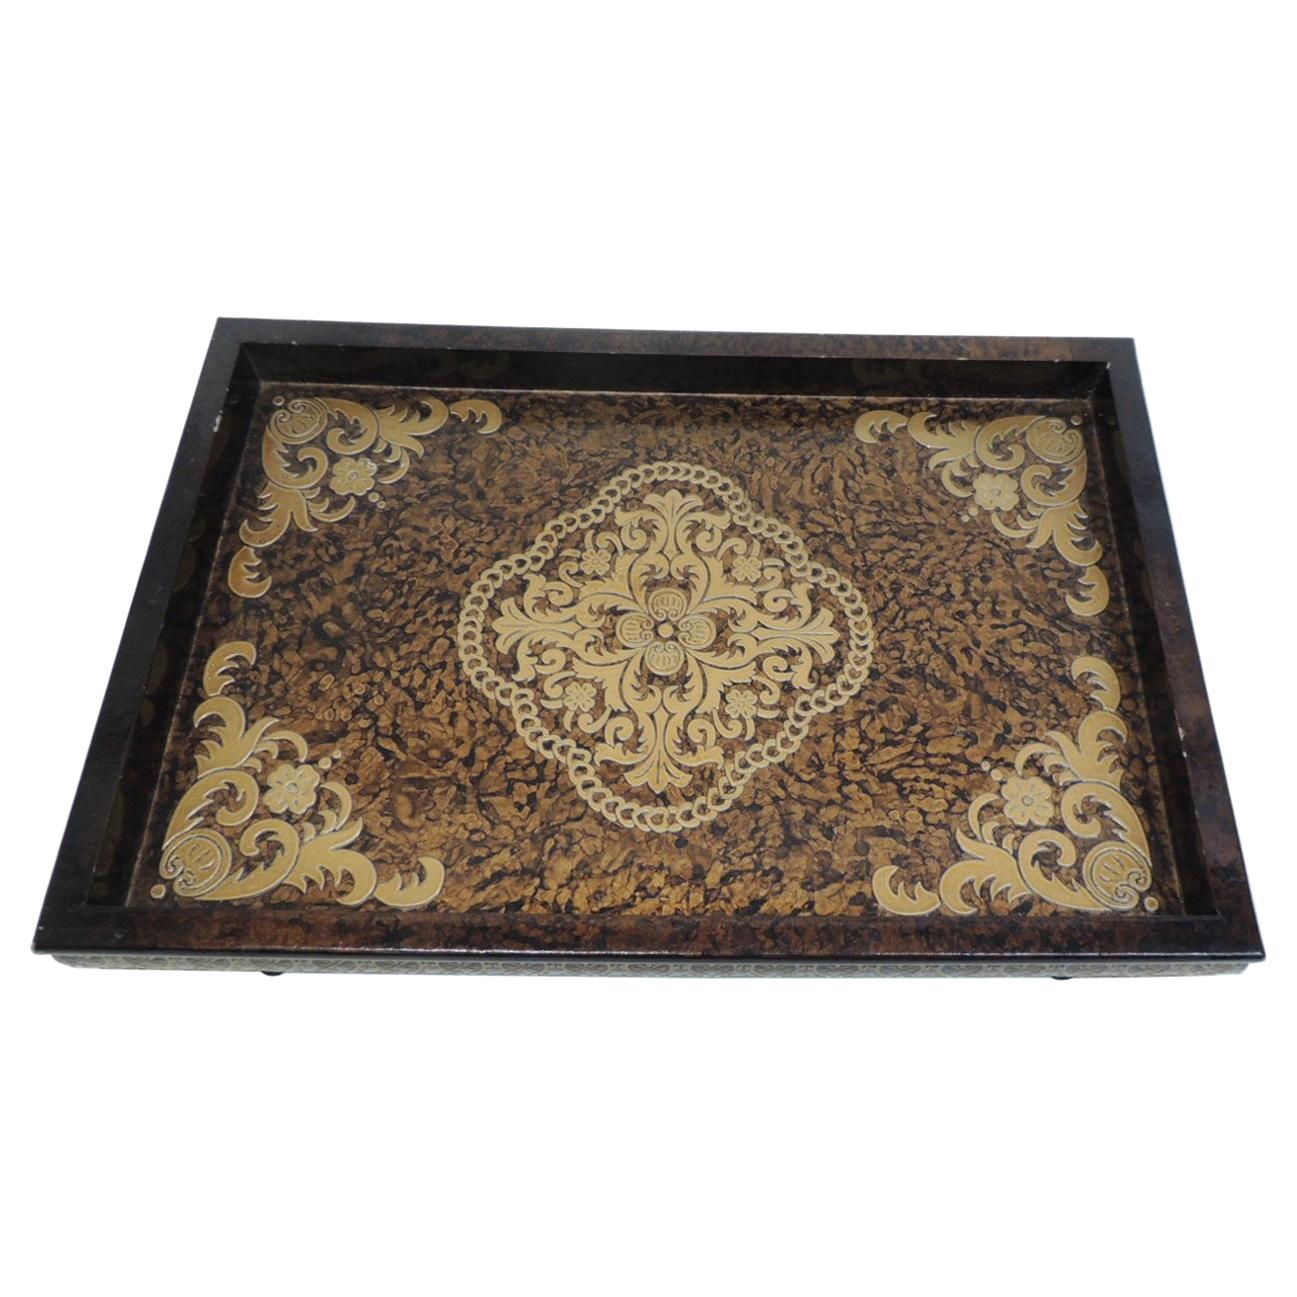 Asian Lacquered Decorative Wood Modern Tray in Brown and Gold